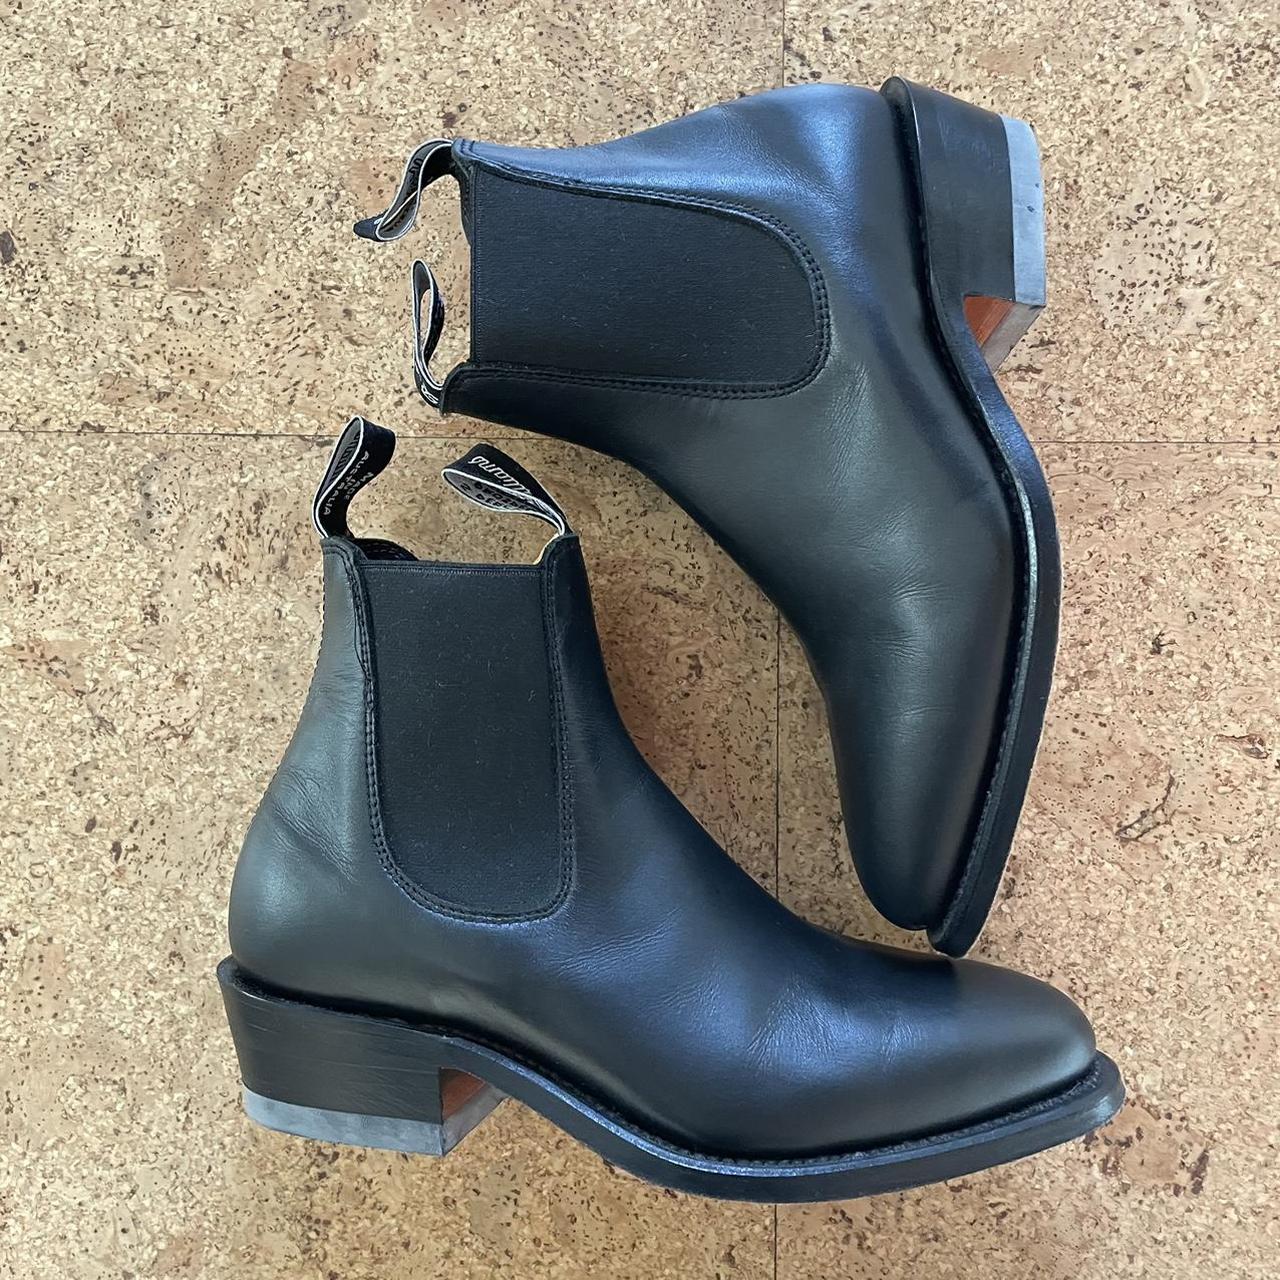 Lady Yearling Boots - Women's